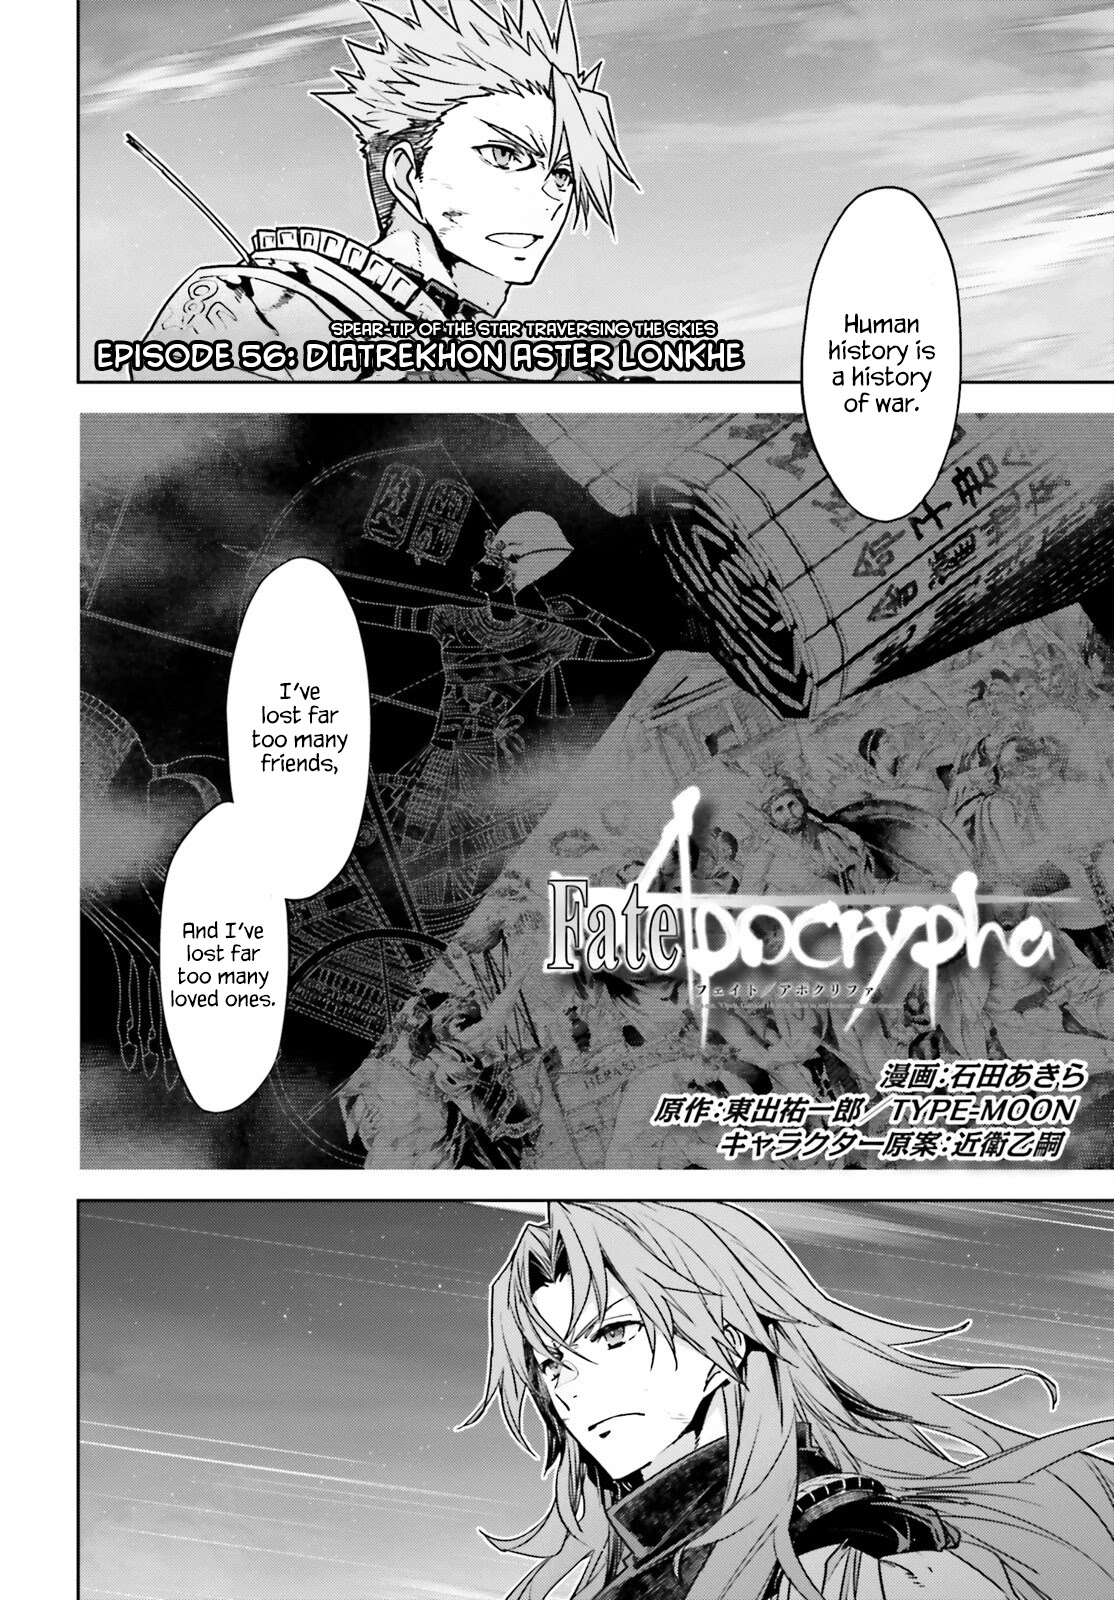 Fate/apocrypha Chapter 56: Episode: 56 Diatrekhon Aster Lonkhe - Picture 2